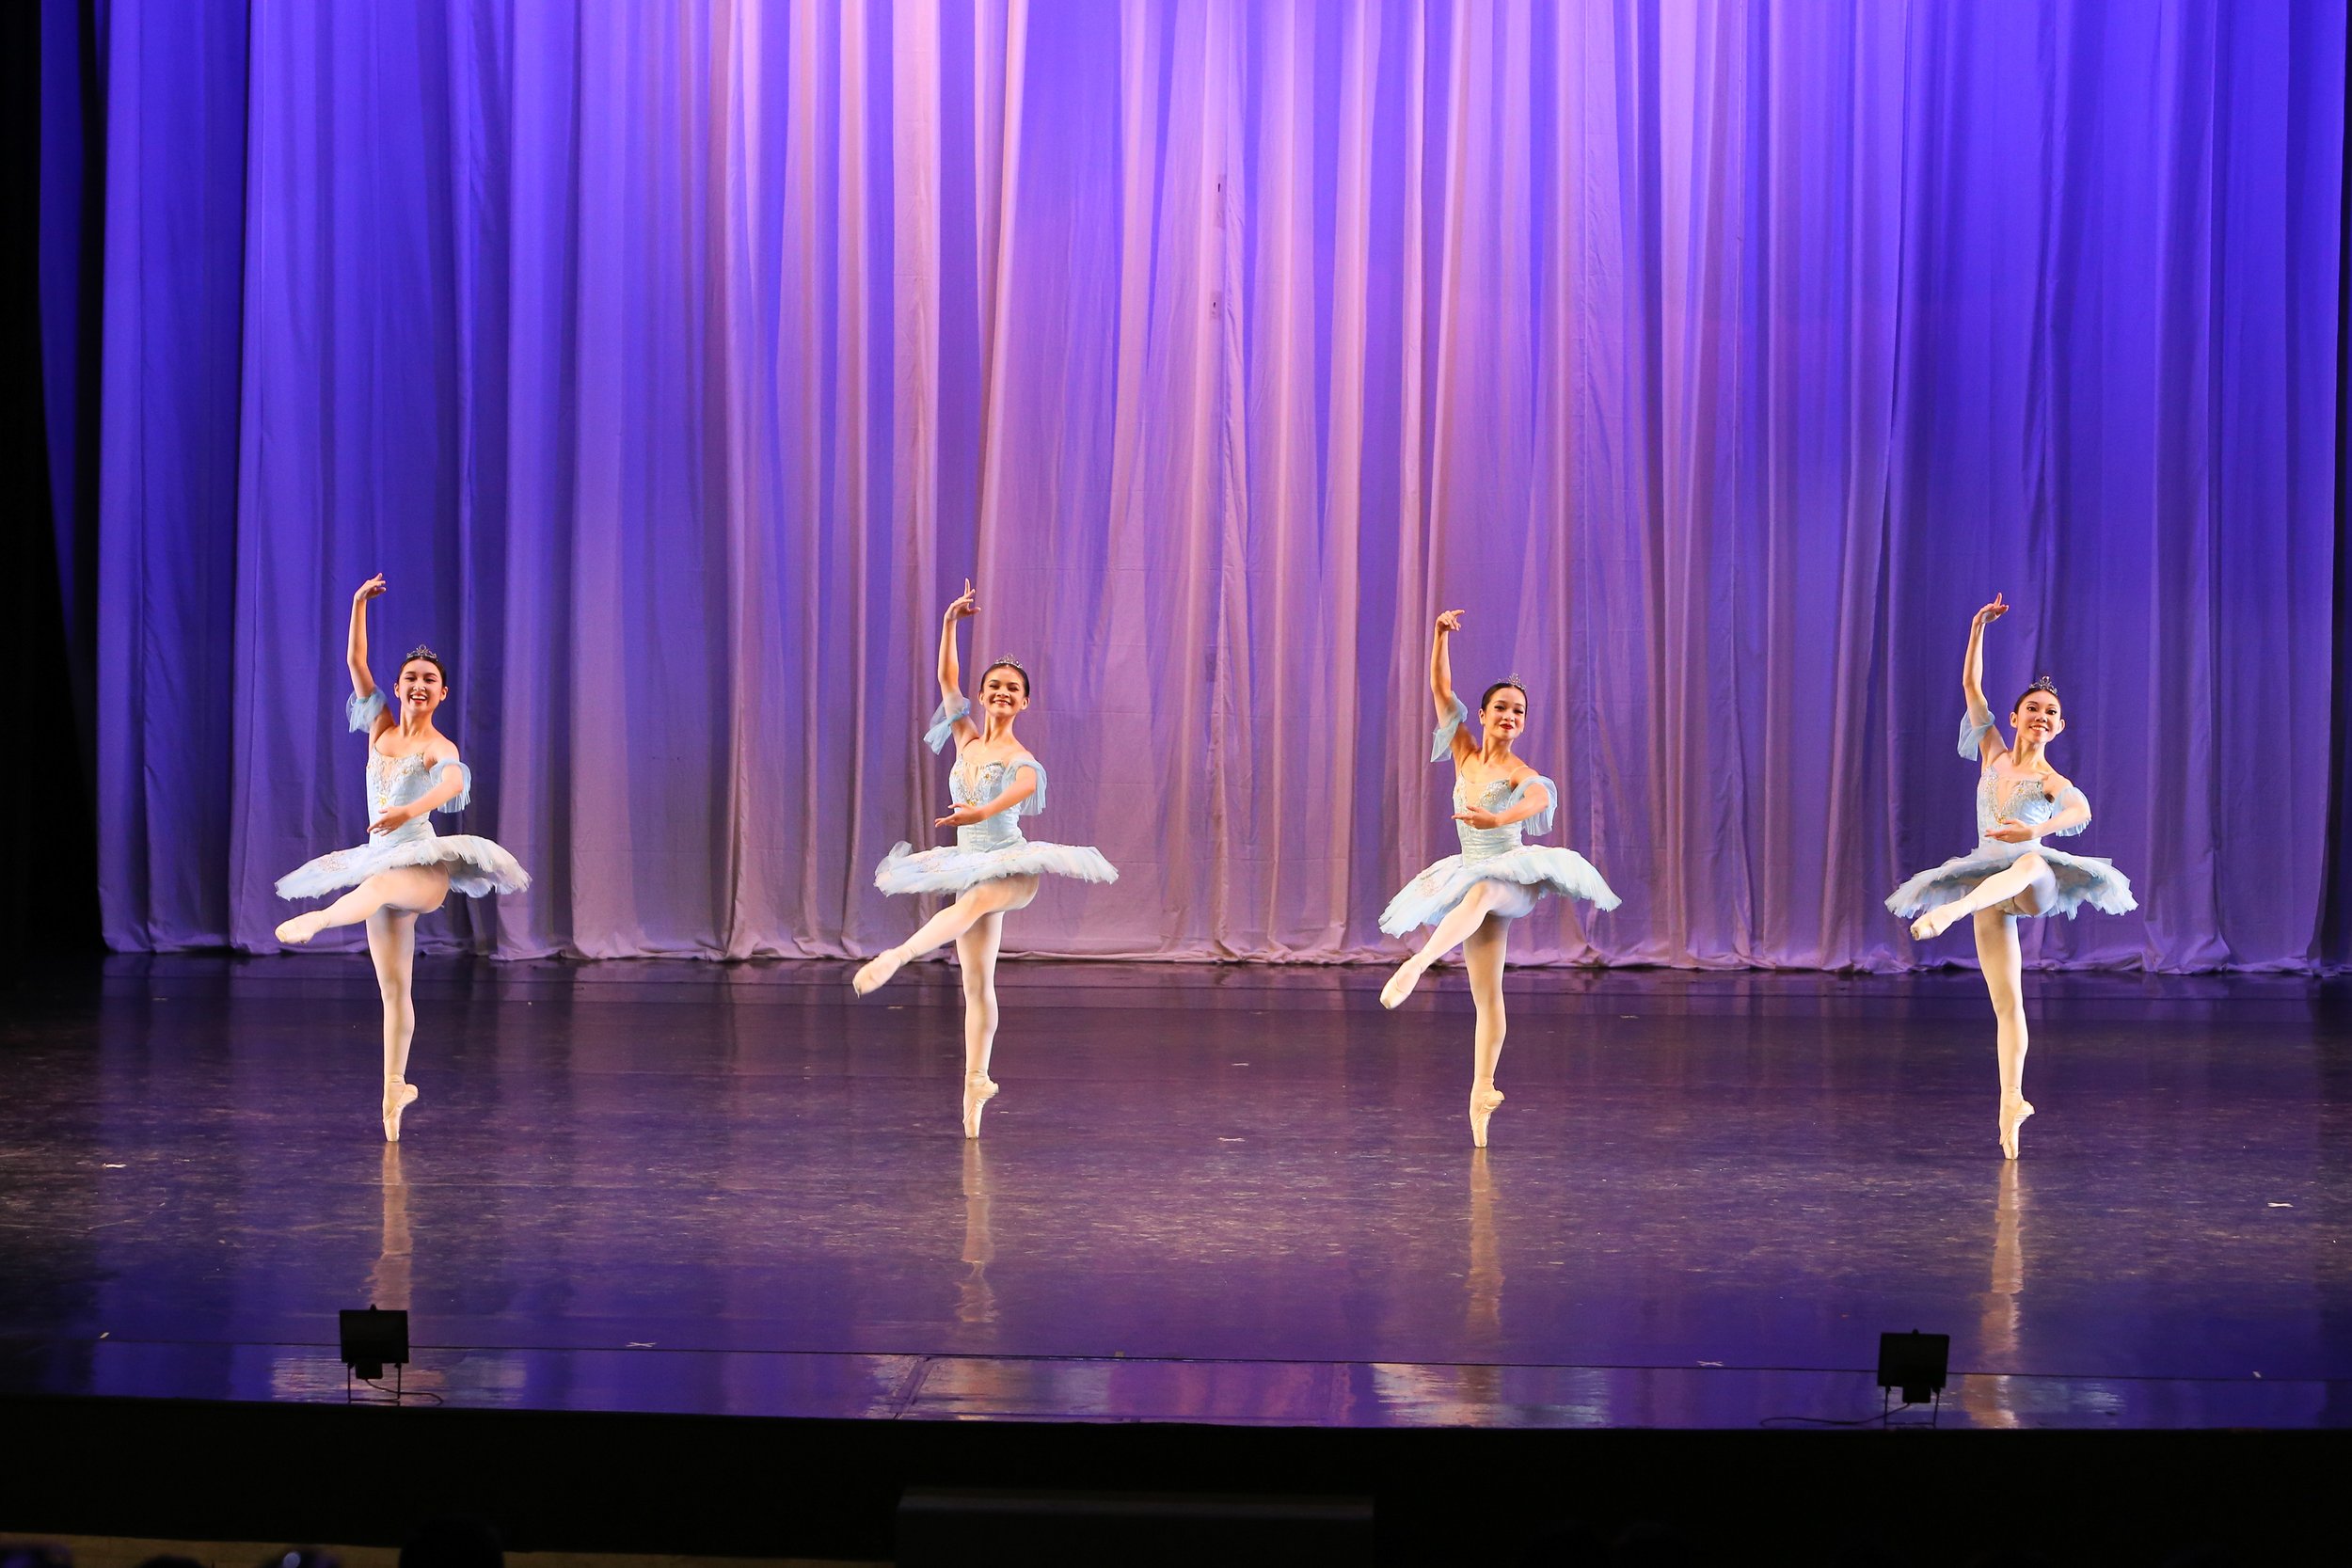    In the Pas D’Action from  La Bayadere , the ballerinas wear powder blue tutus that exude a light and elegant feel. Featuring (from left) Nanami Hasegawa, Shaira Comeros, Jessica Pearl Dames and Kotomi Narai, it was performed in  Deux  (2019).   